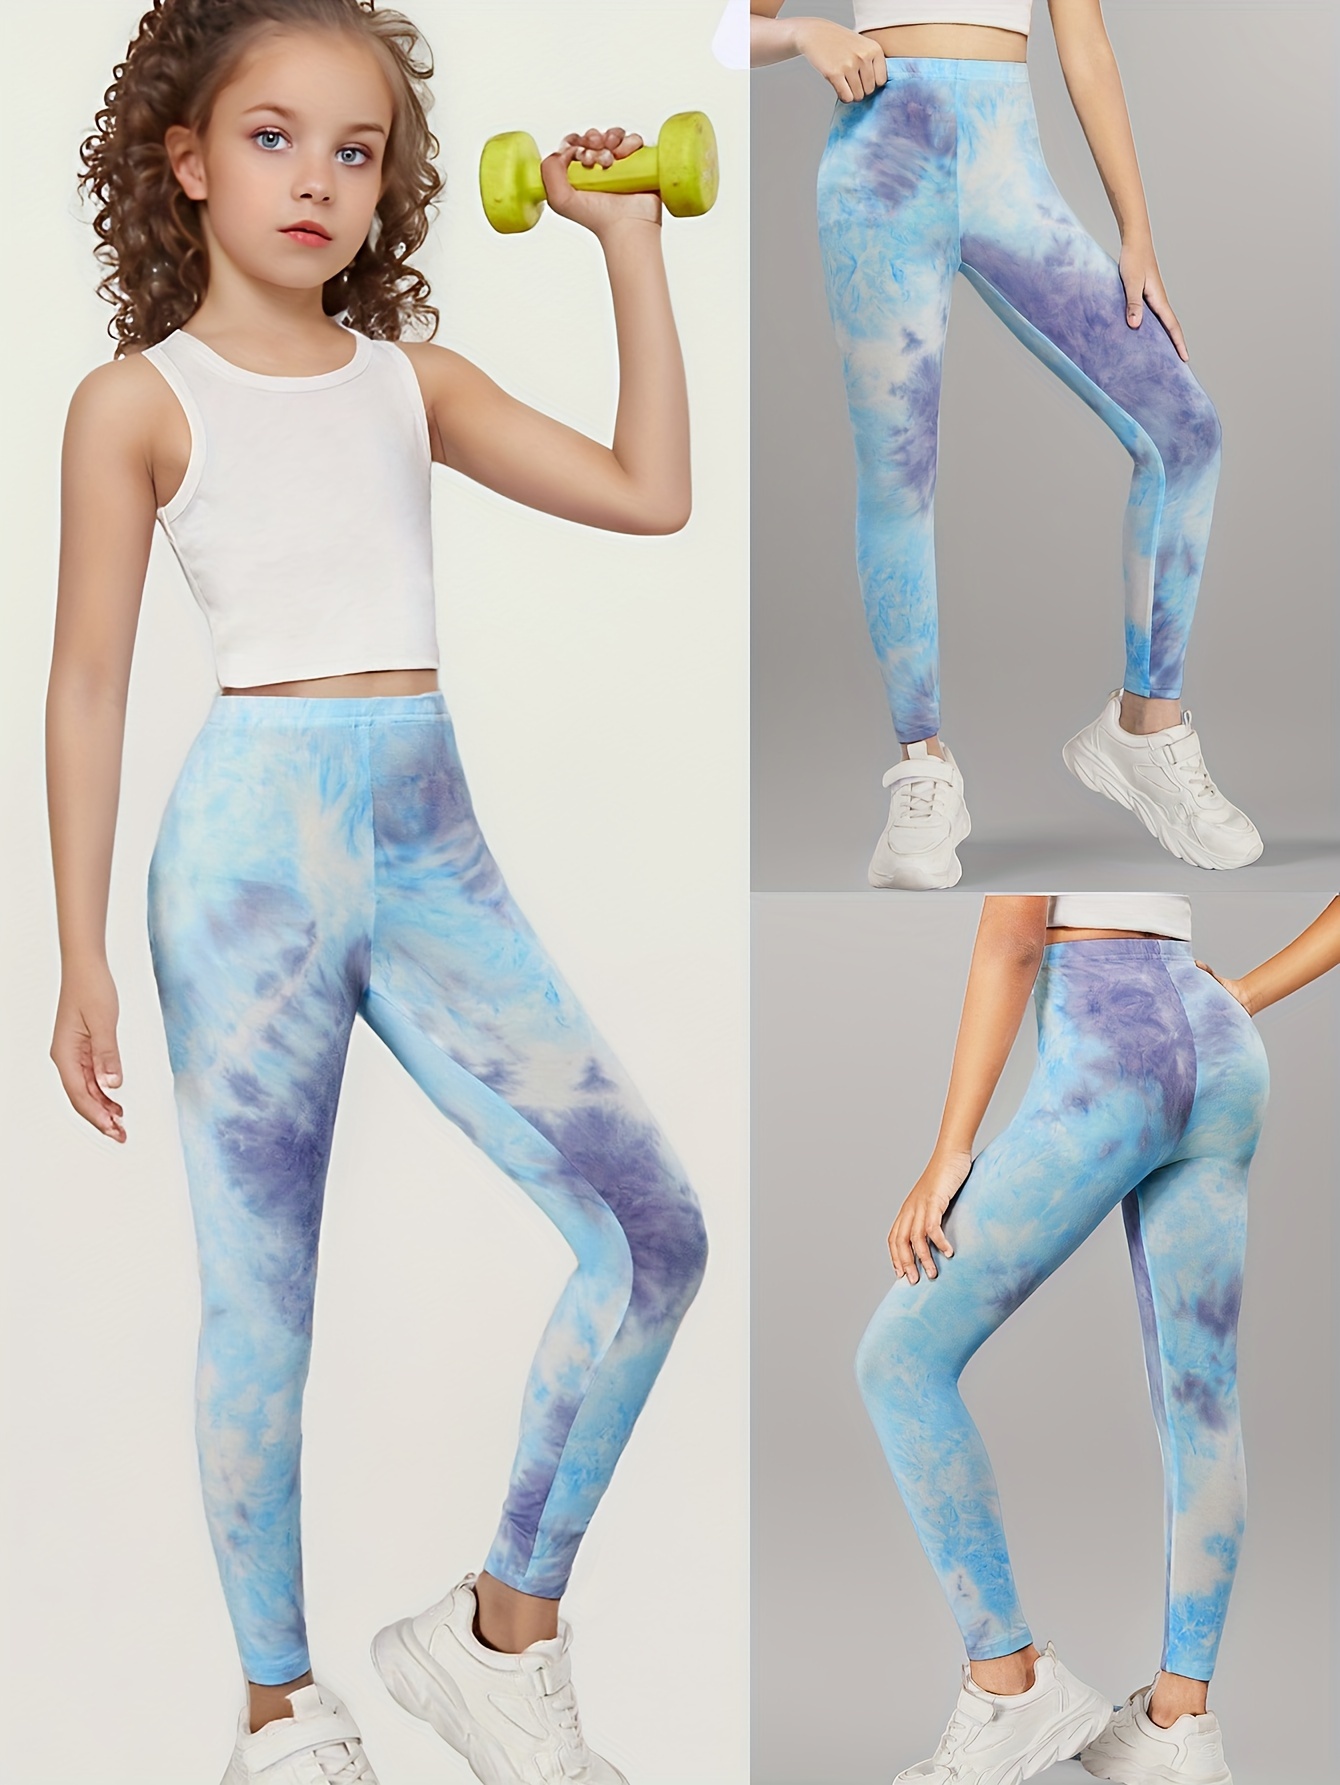 Children High Waist Workout Leggings Yoga Pants with Pockets Tie